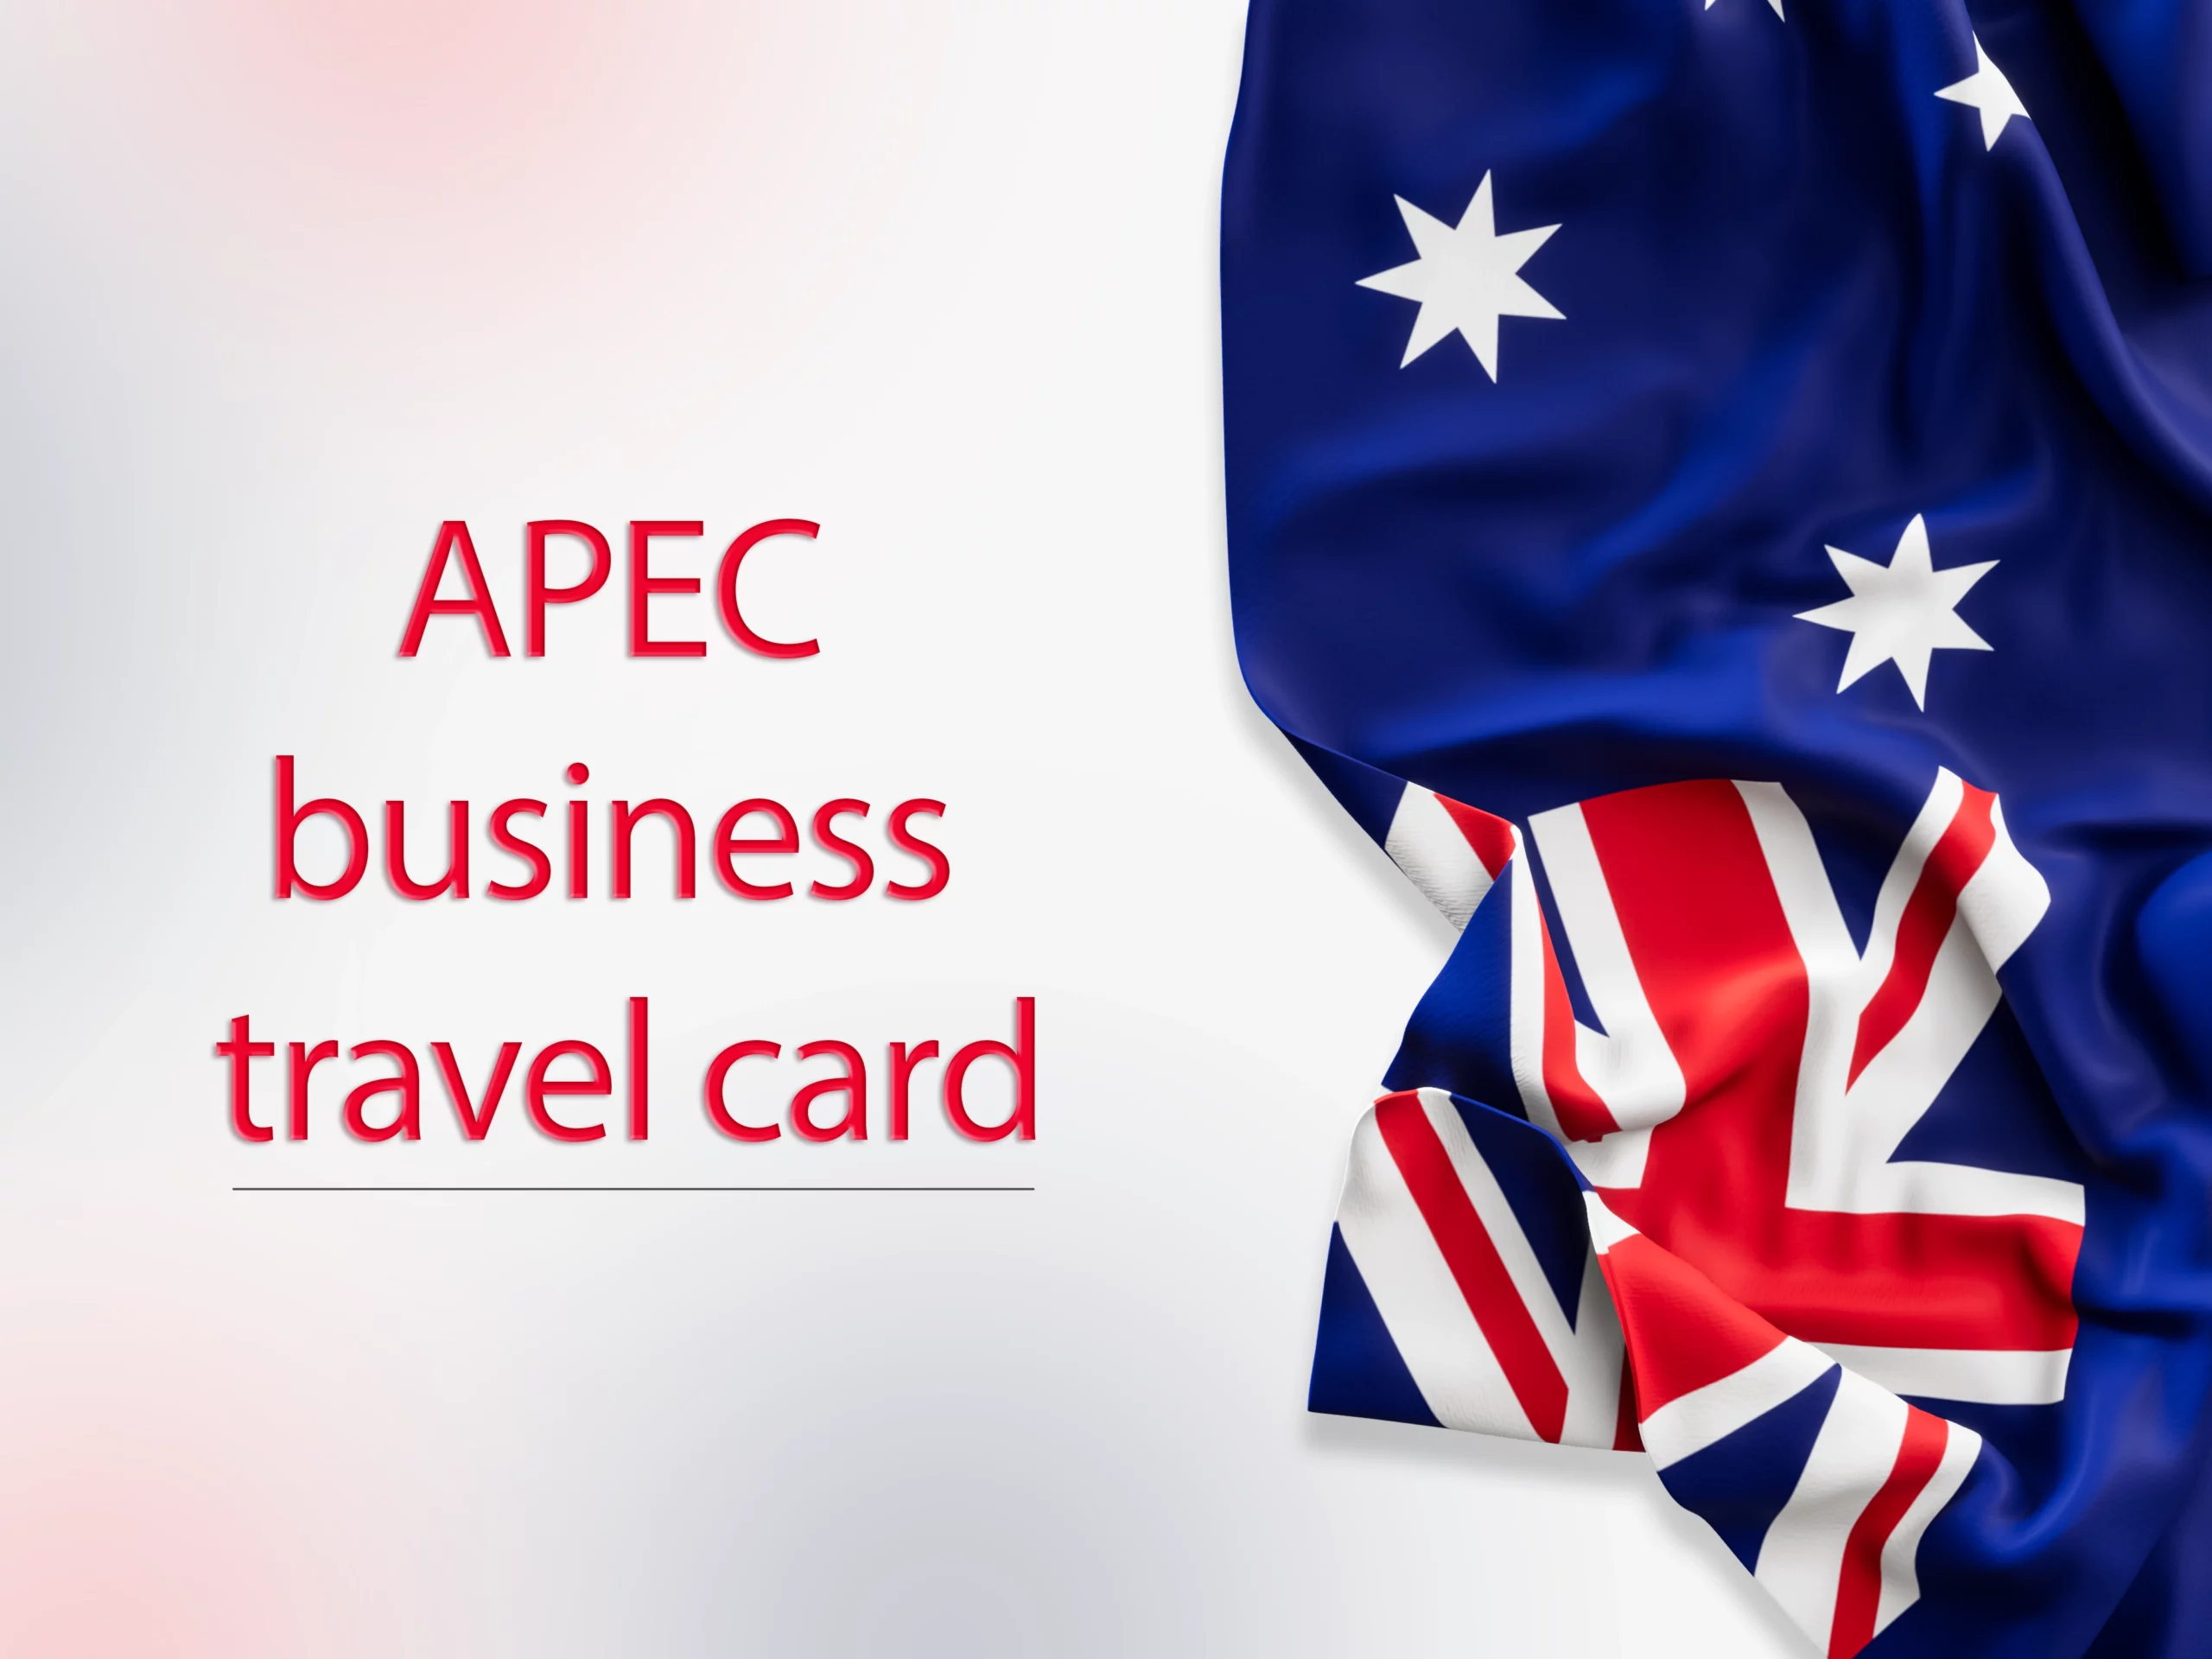 apec business travel card reference letter